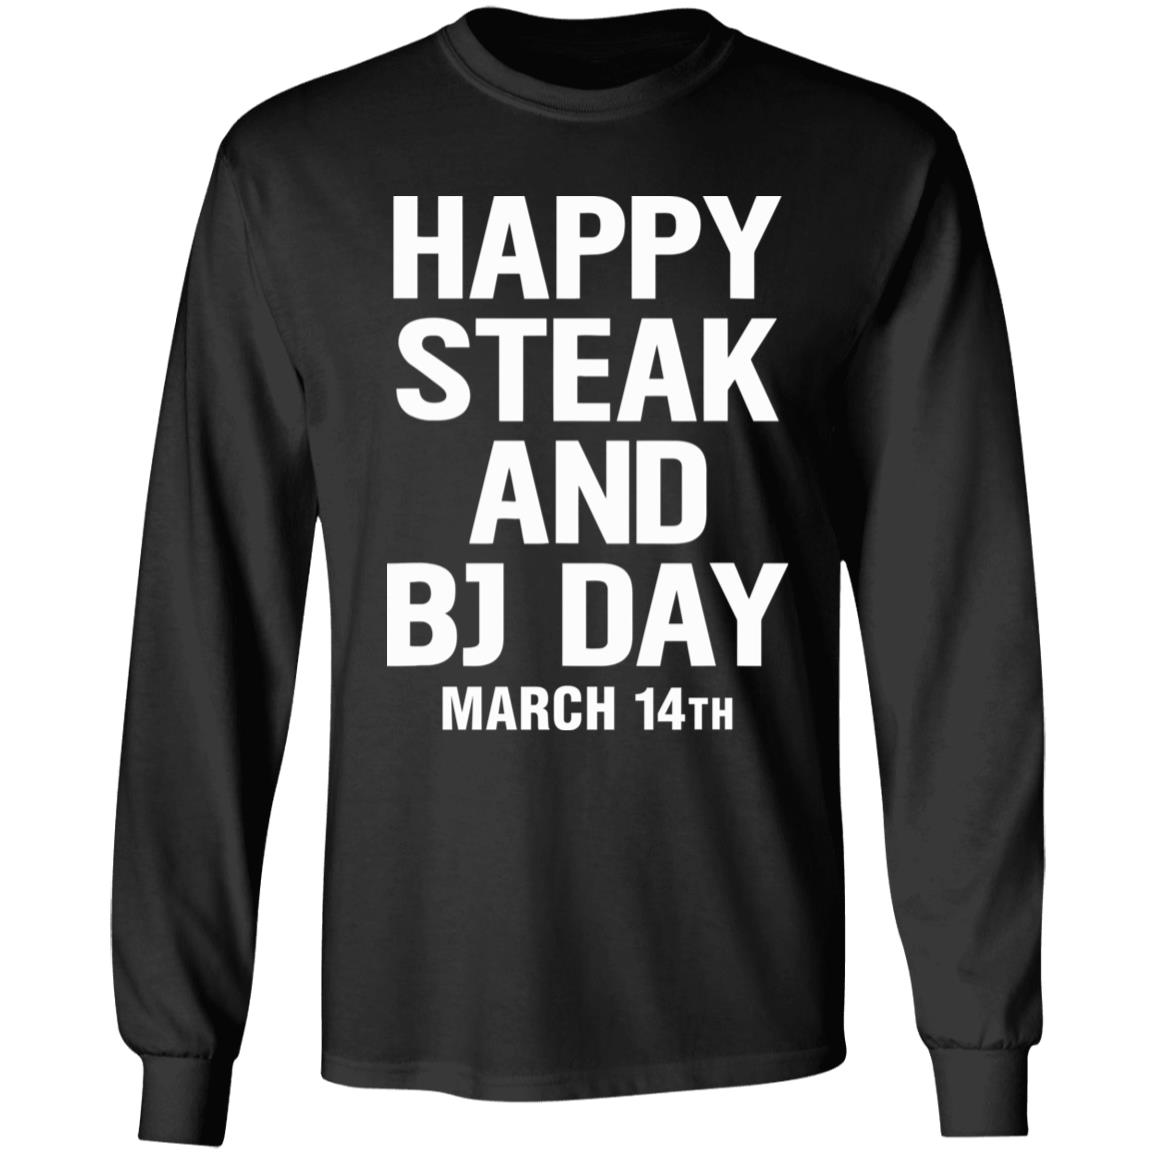 carolyn m greene recommends National Steak And Blow Job Day